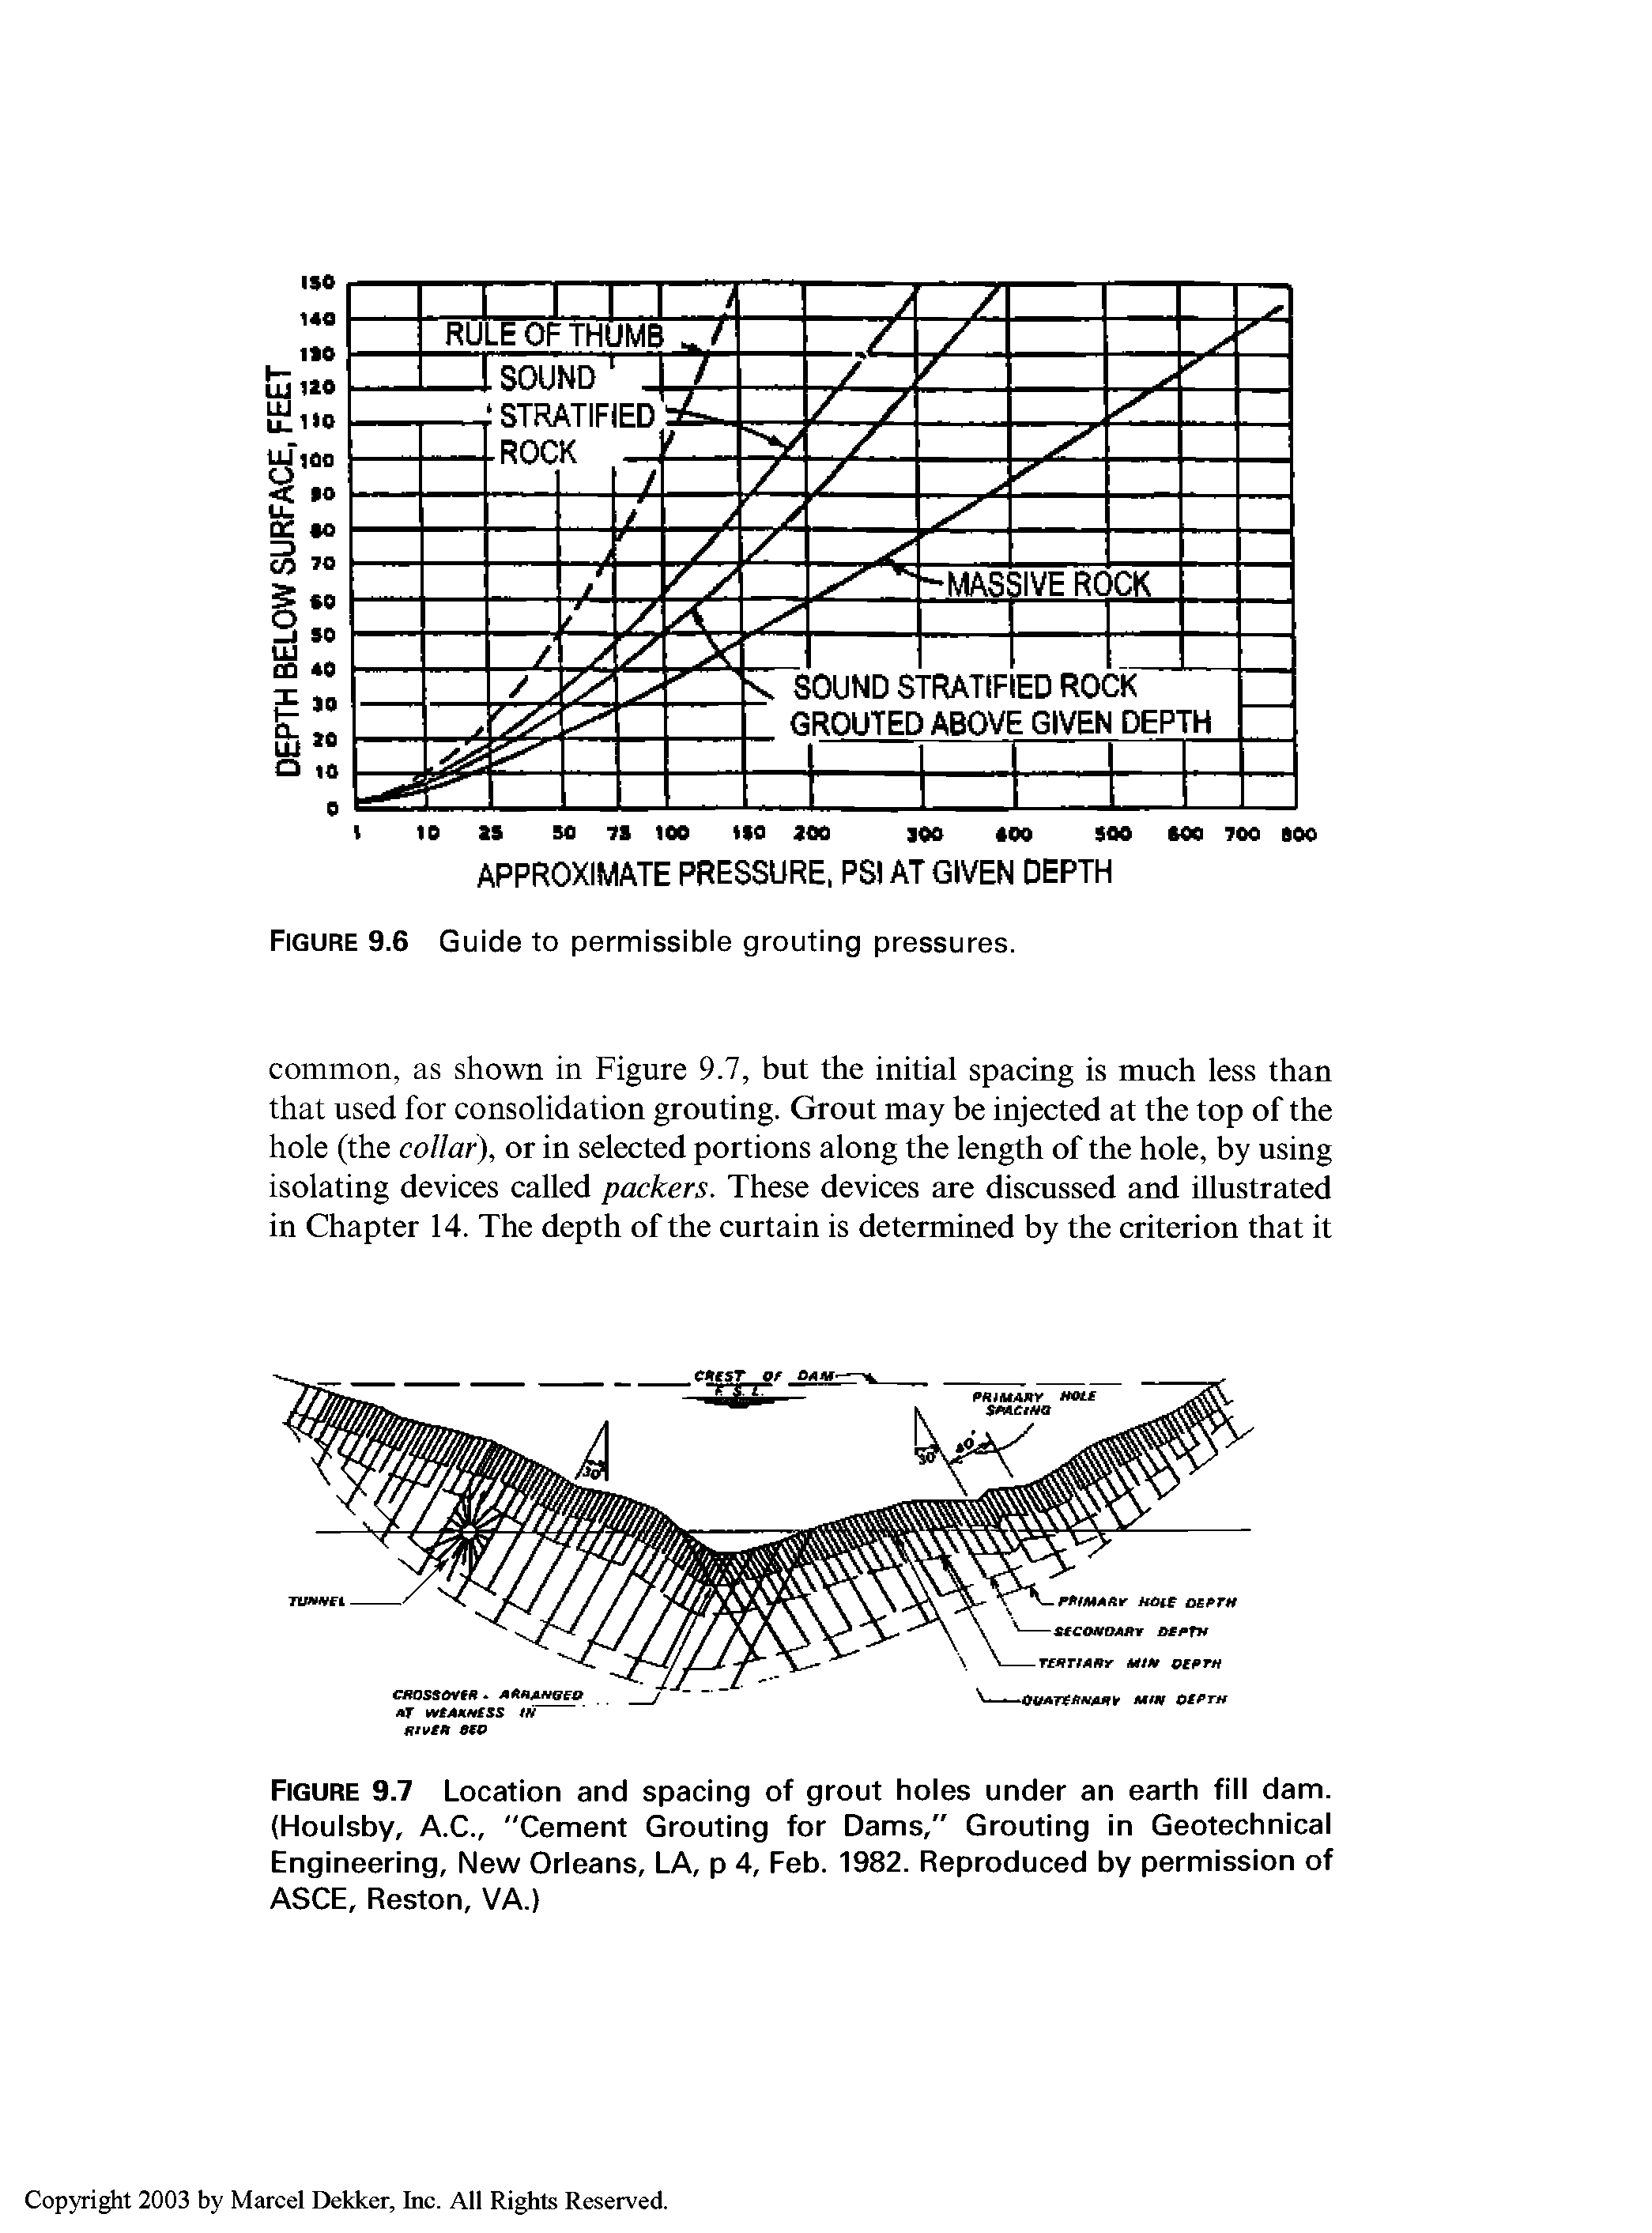 Figure 9.7 Location and spacing of grout holes under an earth fill dam. (Houlsby, A.C., "Cement Grouting for Dams," Grouting in Geotechnical Engineering, New Orleans, LA, p 4, Feb. 1982. Reproduced by permission of ASCE, Reston, VA.)...